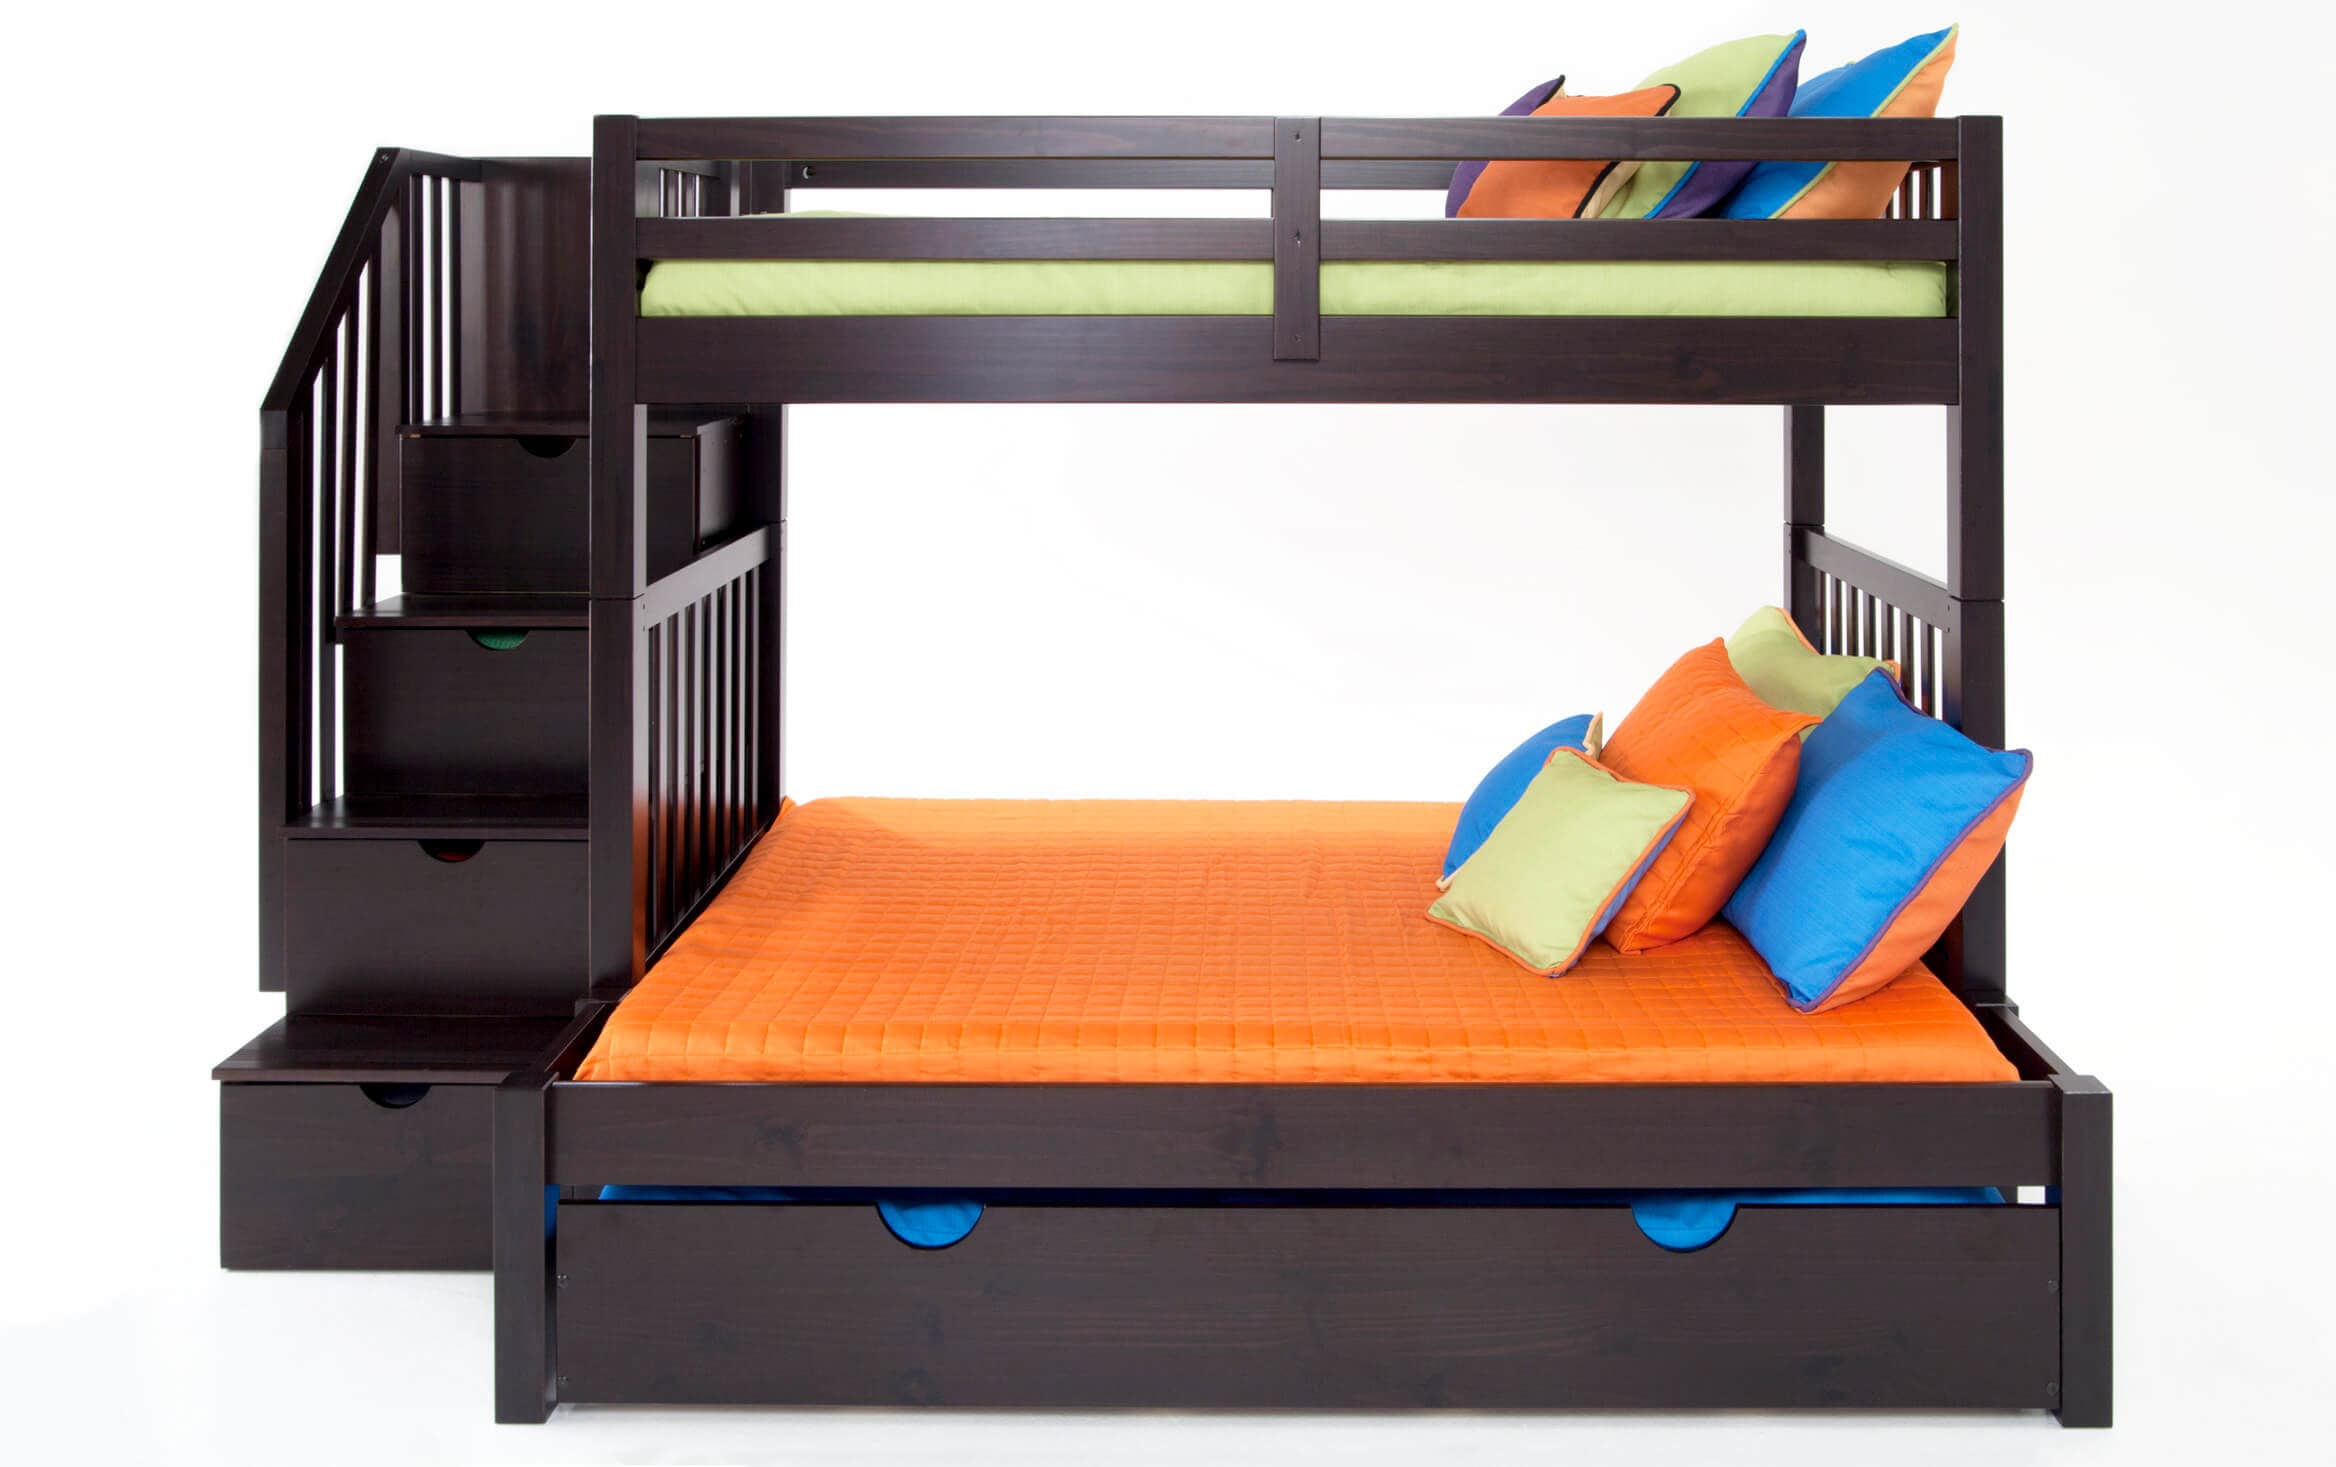 bunk beds for sale in my area